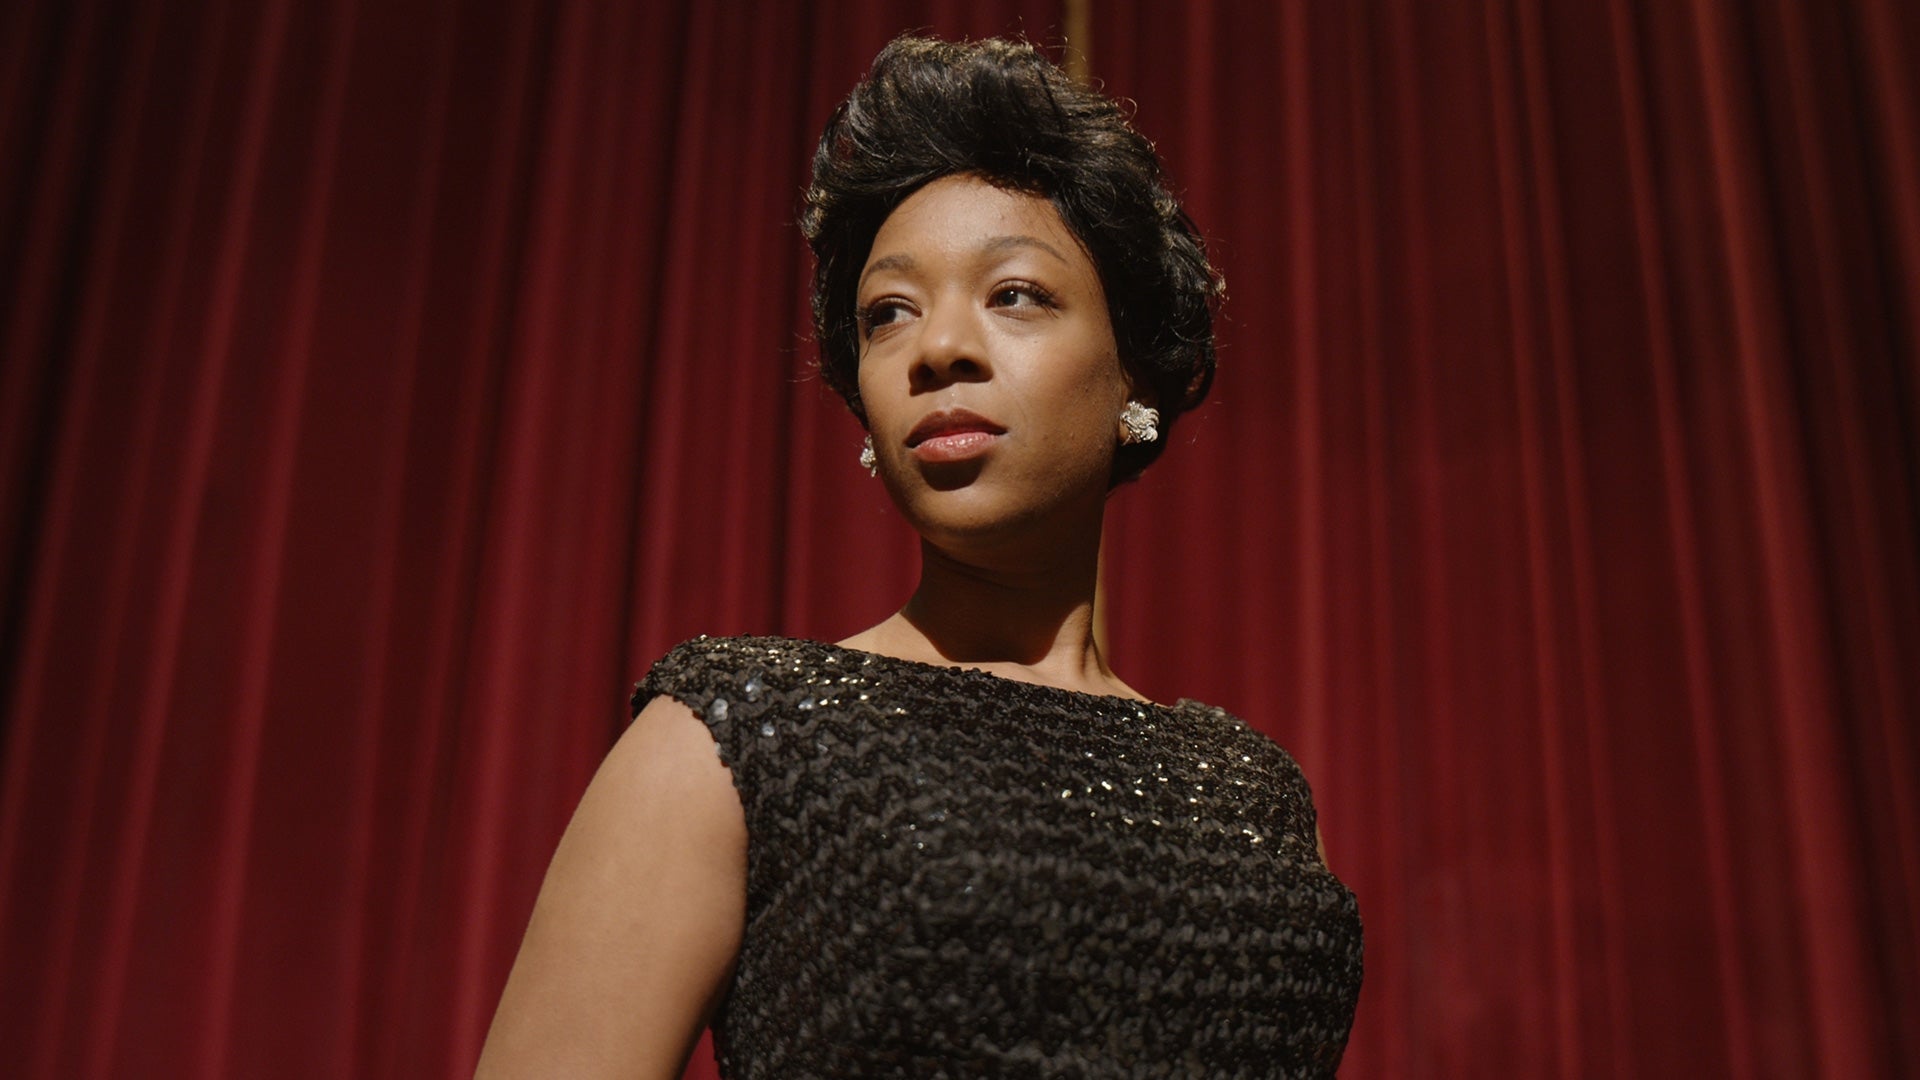 Watch Samira Wiley Portray Playwright Lorraine Hansberry in 'Equal' (Exclusive) 